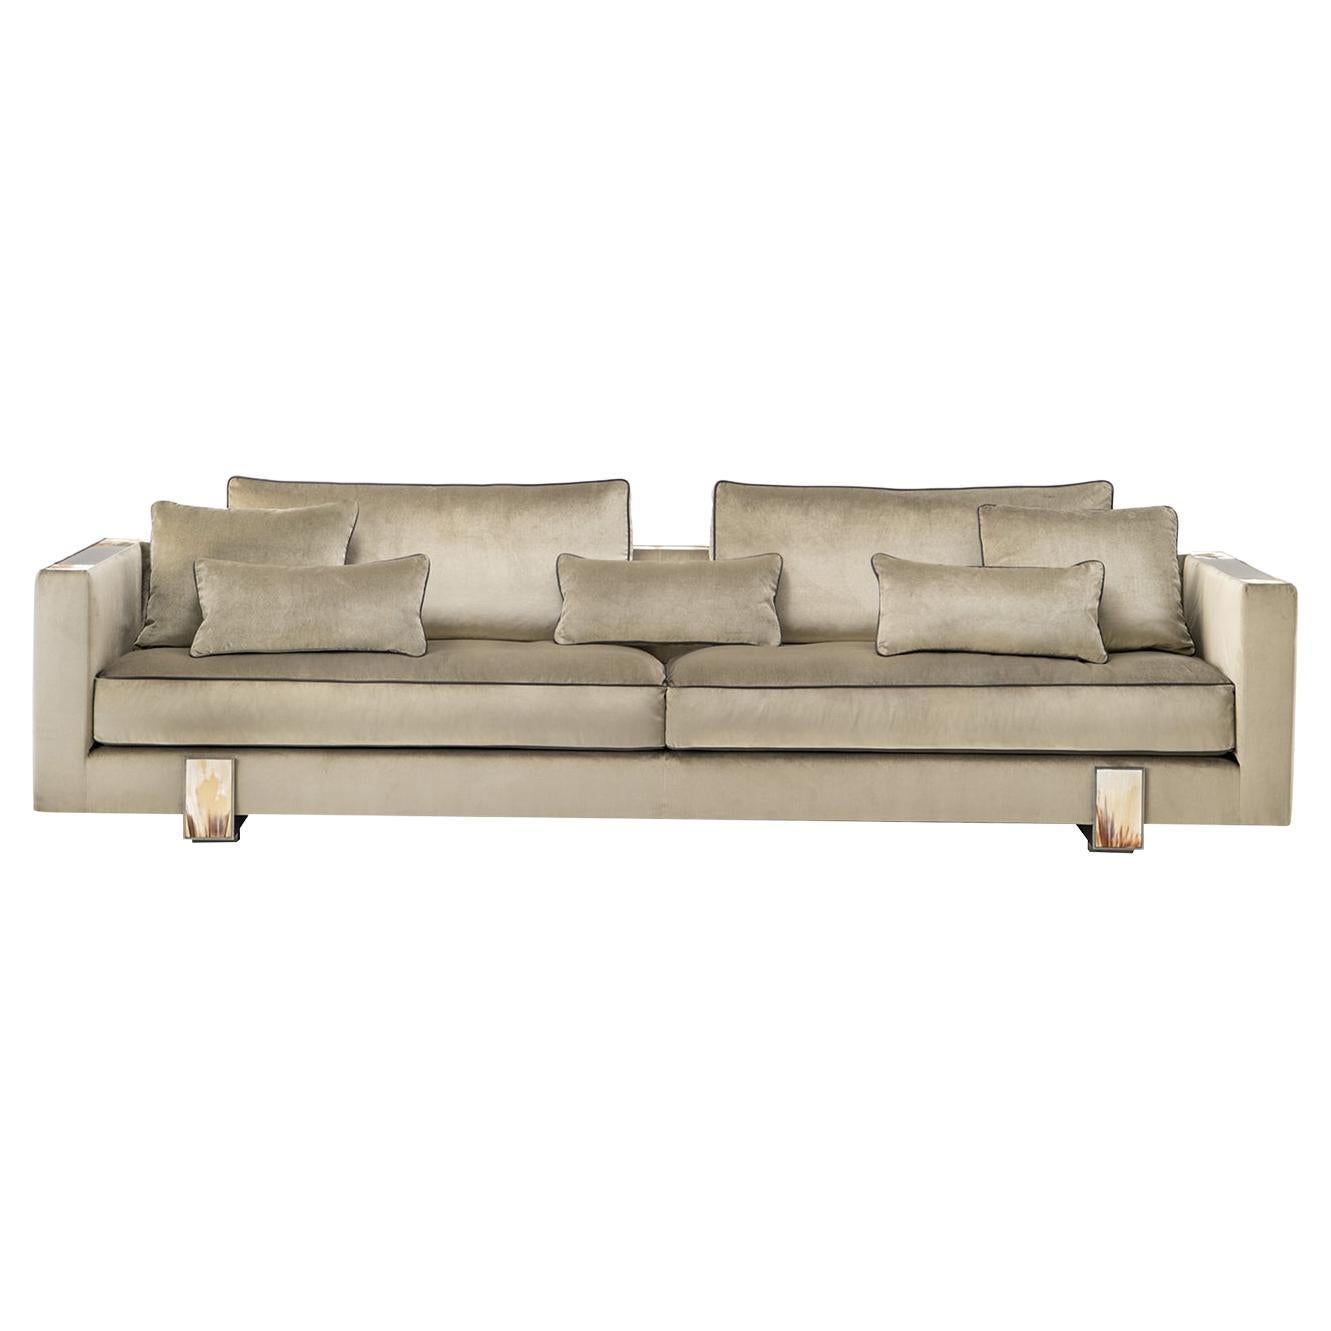 Adriano 4-Seater Beige Sofa with Horn Inlays